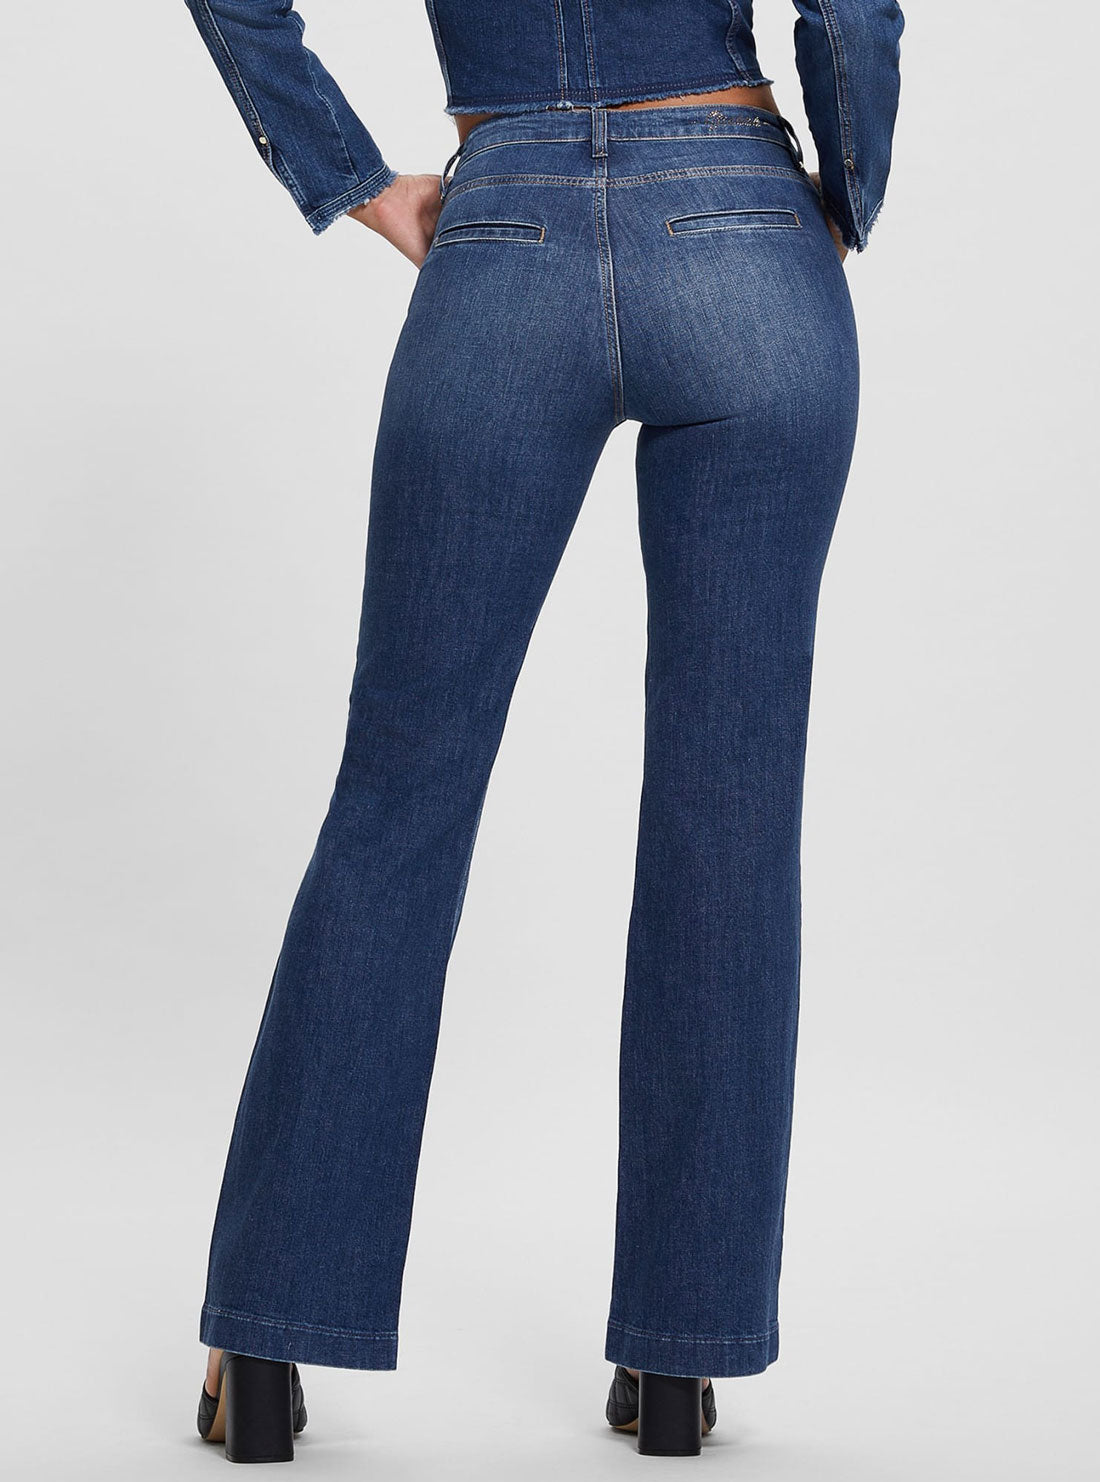 Eco Blue Chain Pocket Sexy Bootcut Denim Jeans | GUESS Women's Apparel | back view